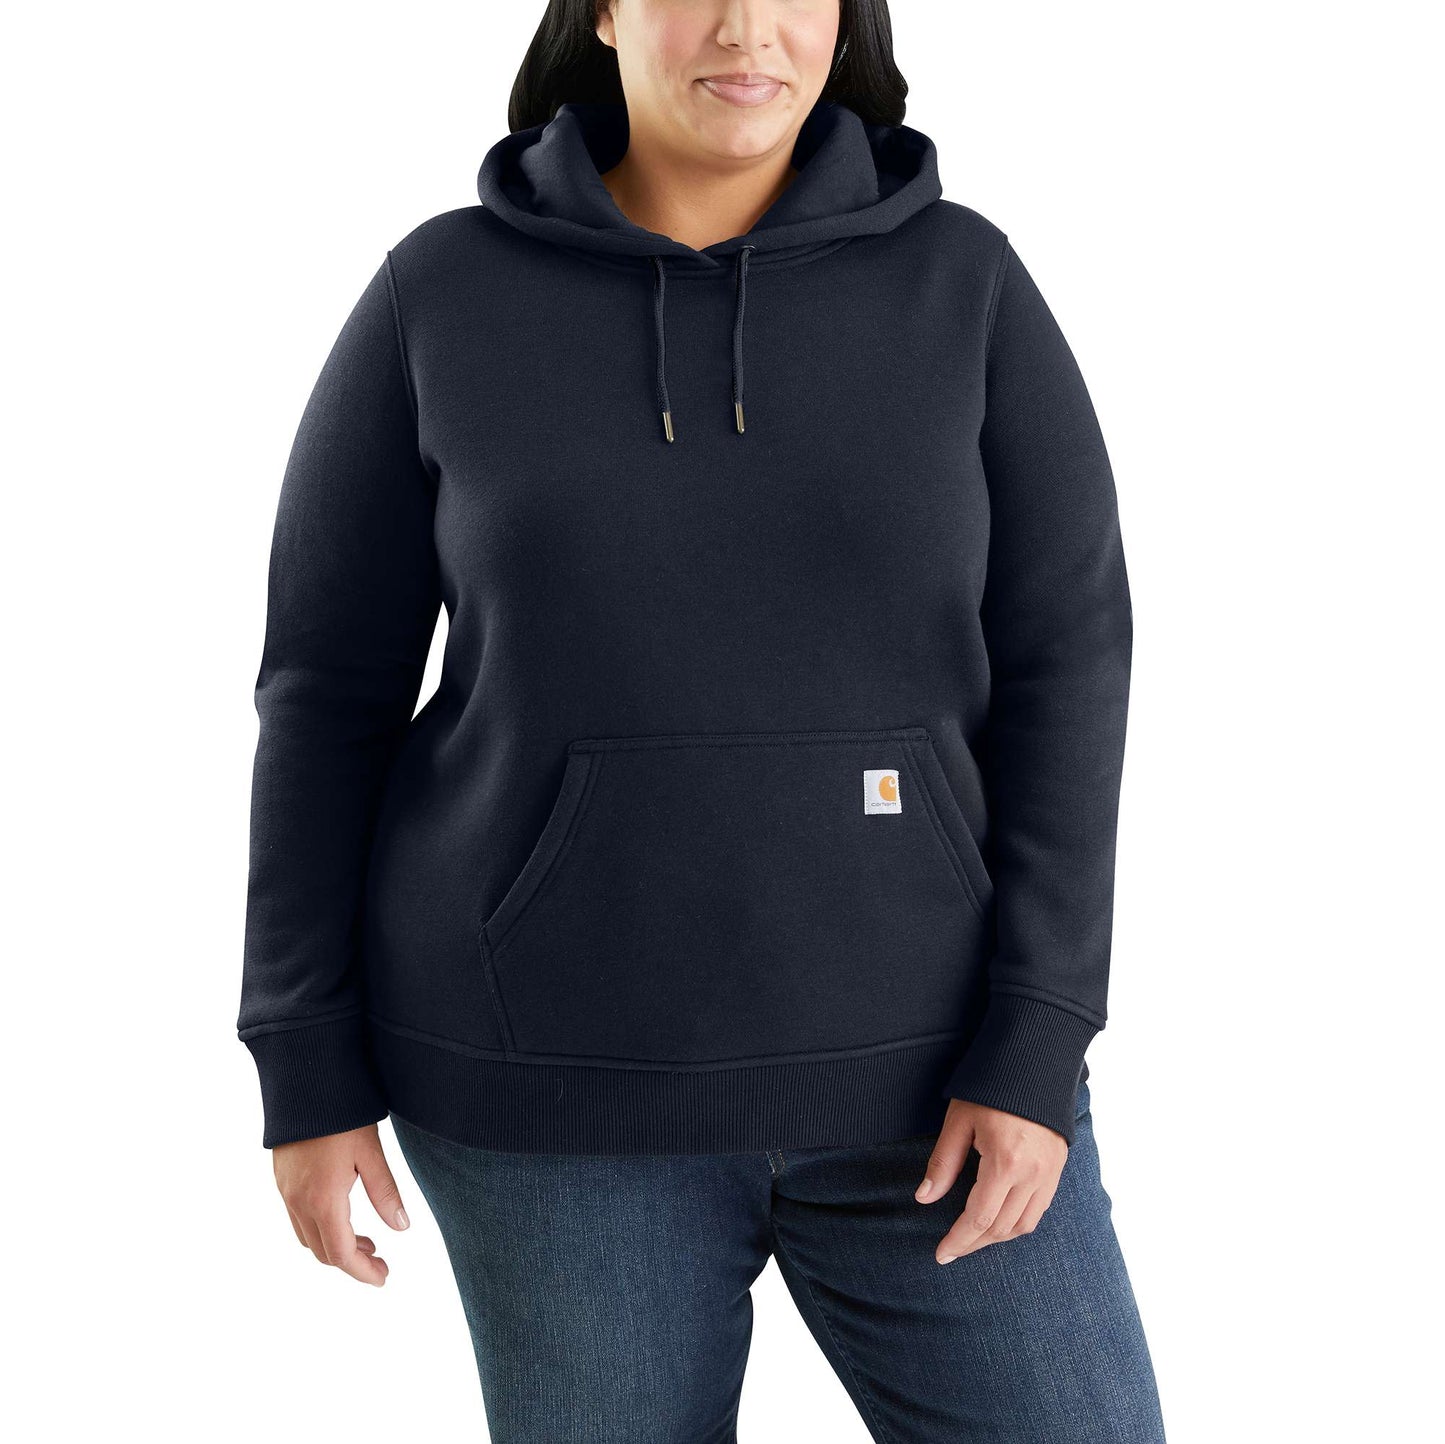 Relaxed Fit Midweight Sweatshirt